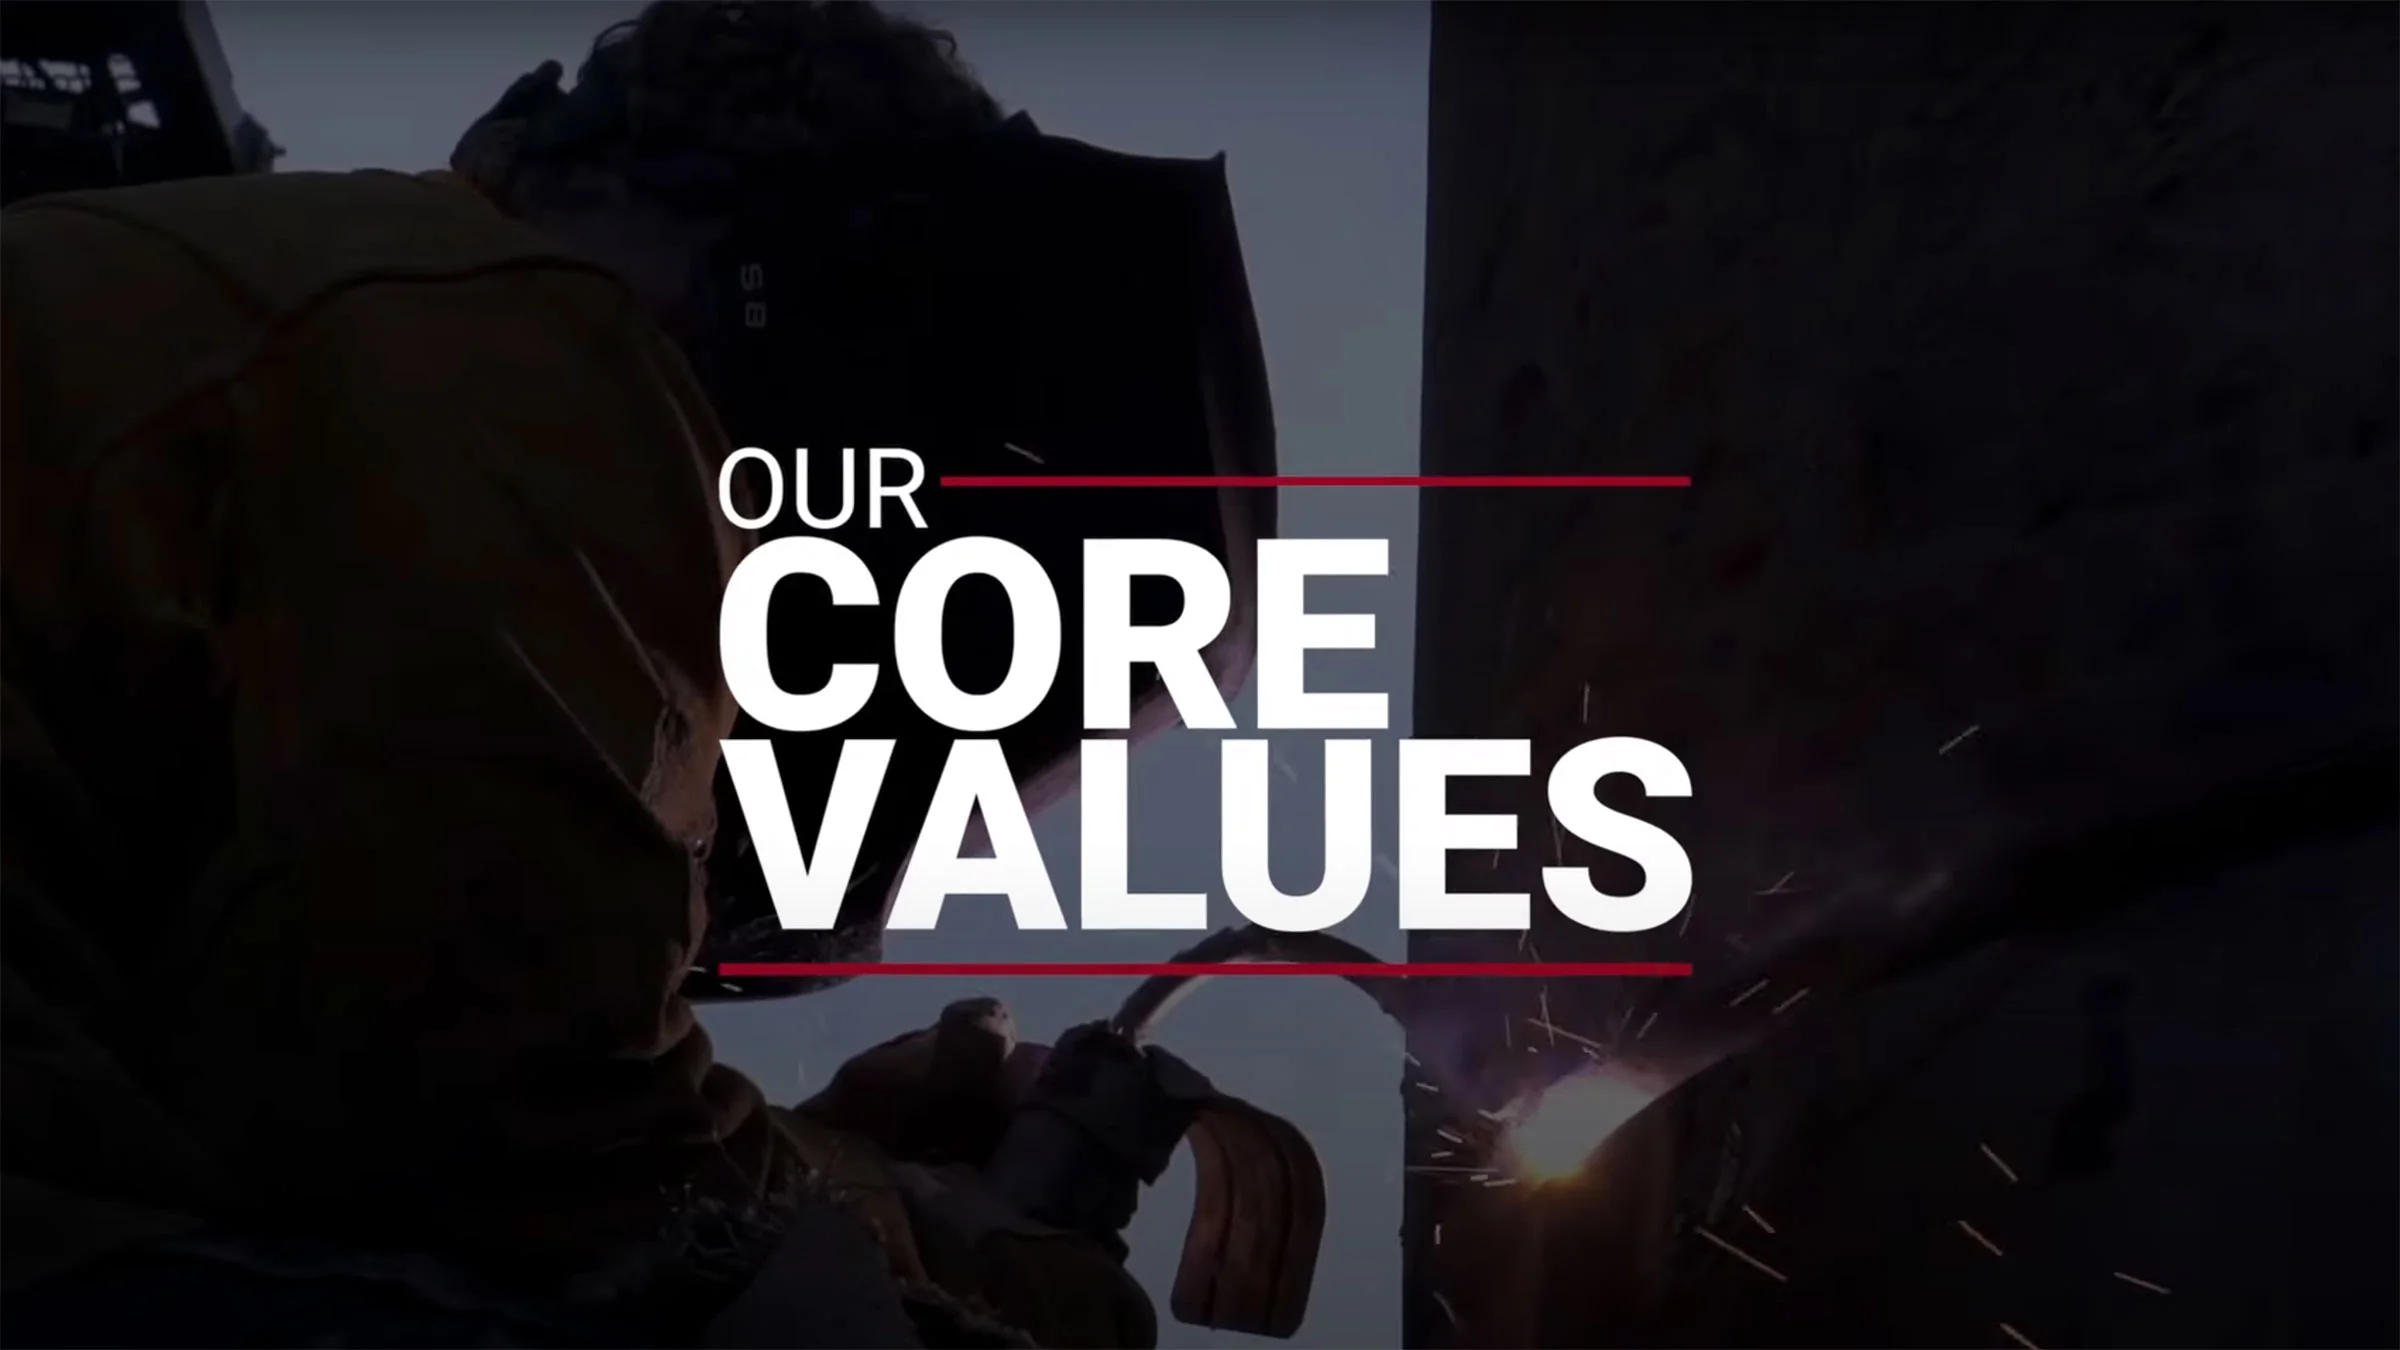 Our core values graphic.